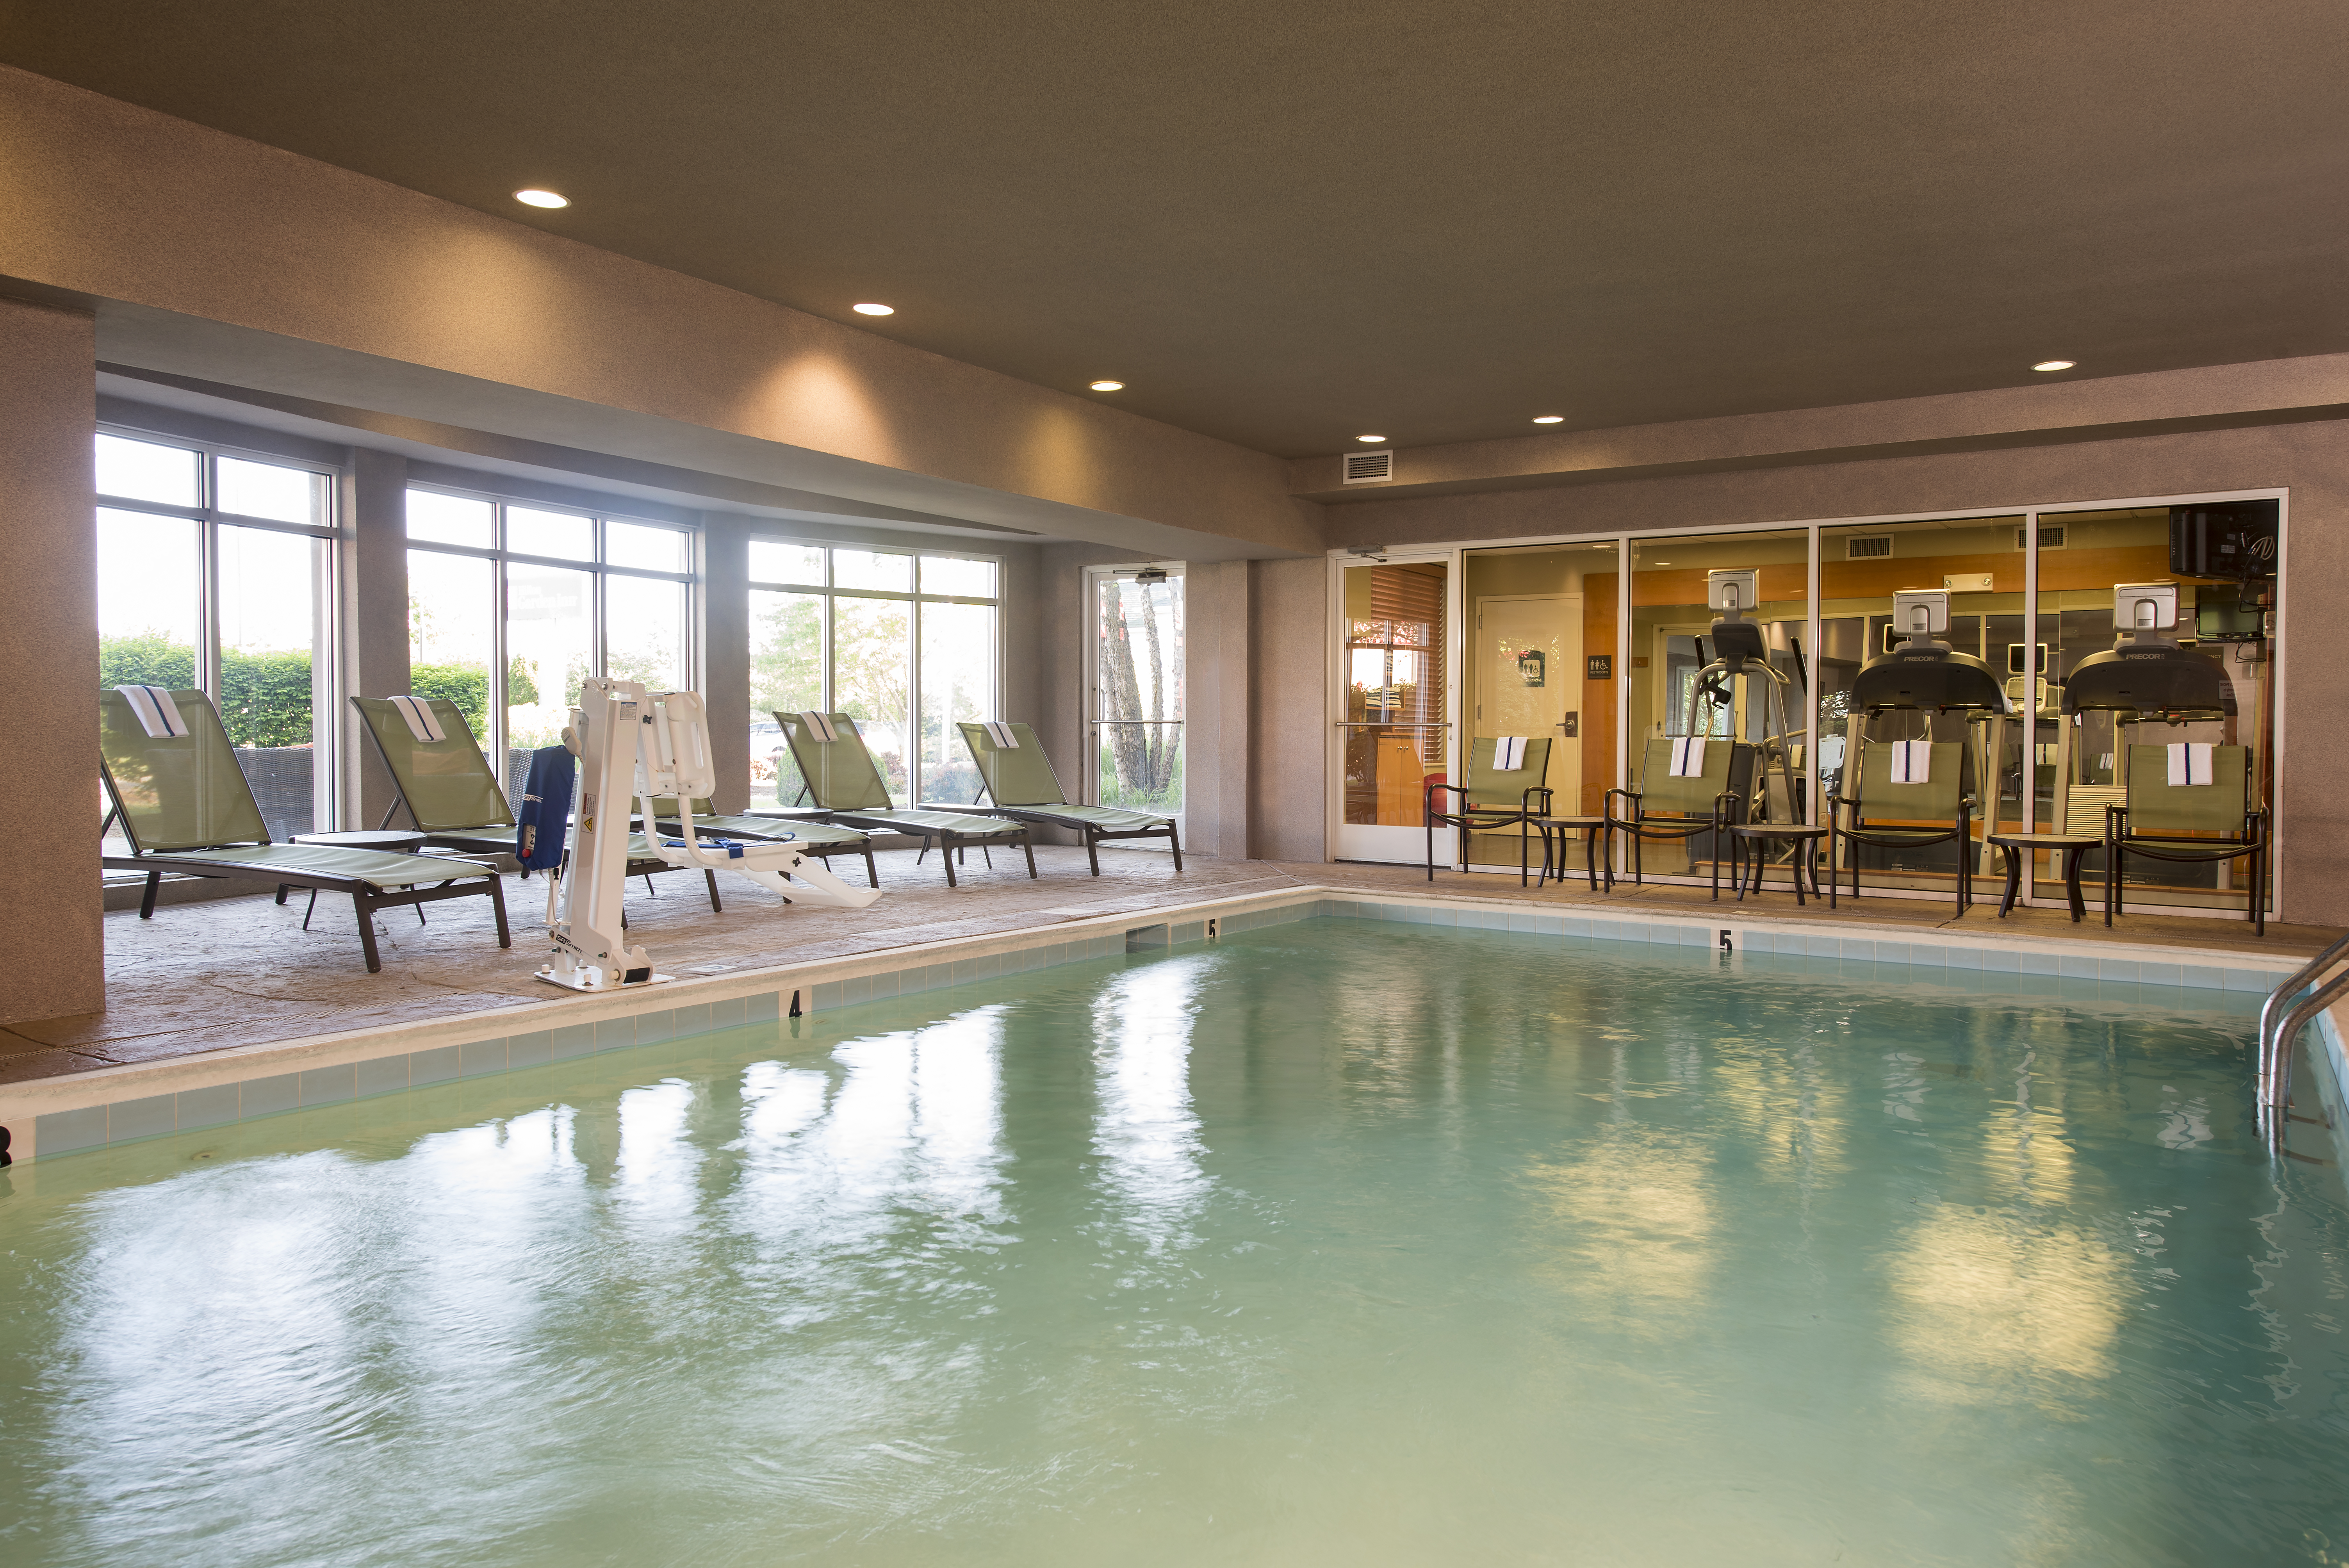 Indoor Pool With Chairs by Windows With Fitness Center View and Lounge Chairs By Windows With Outside Views